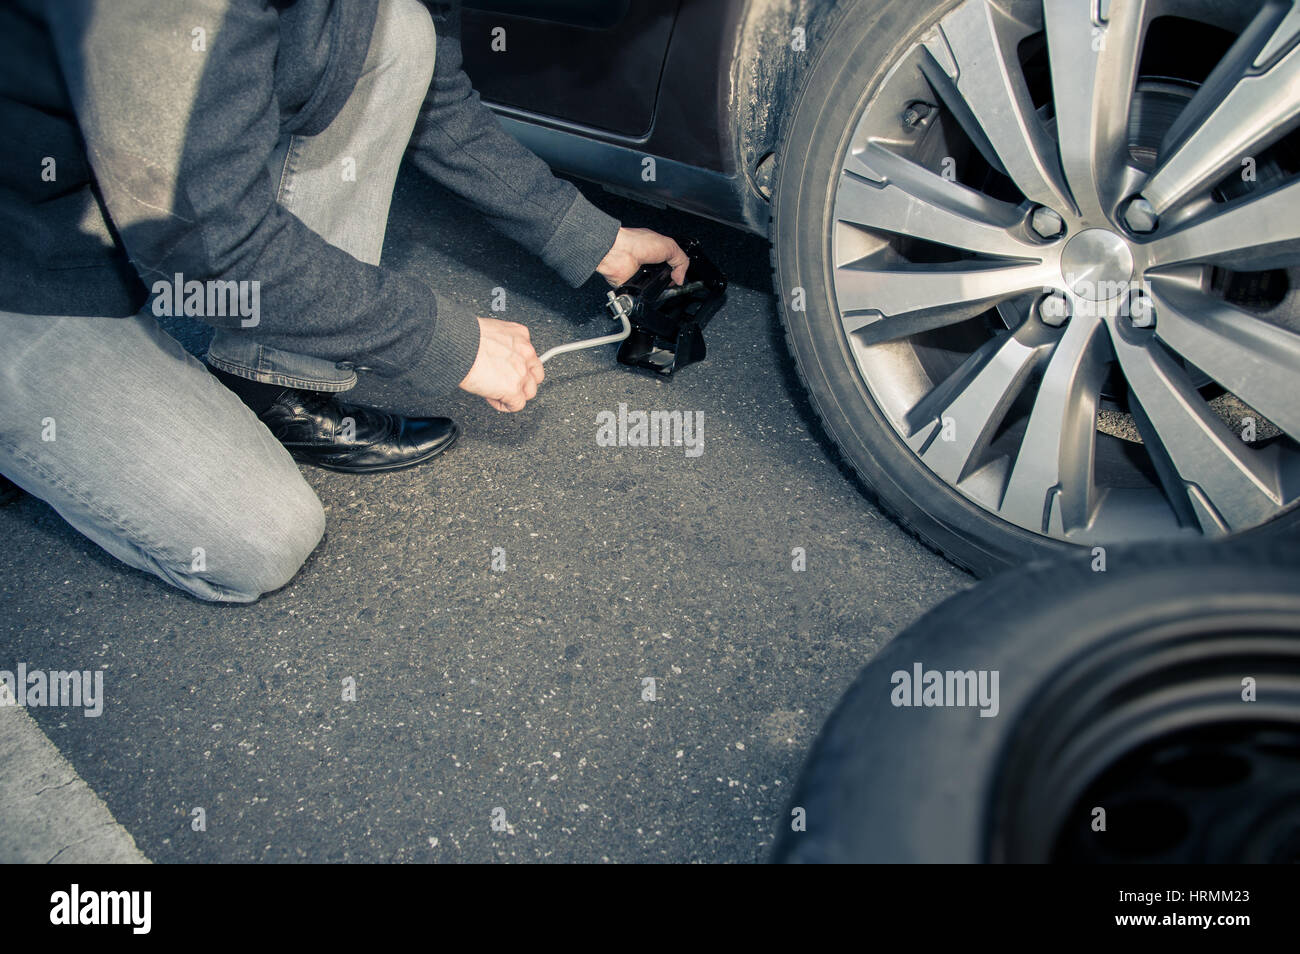 Man picks up vehicle with the lifting jack to change a tire Stock Photo